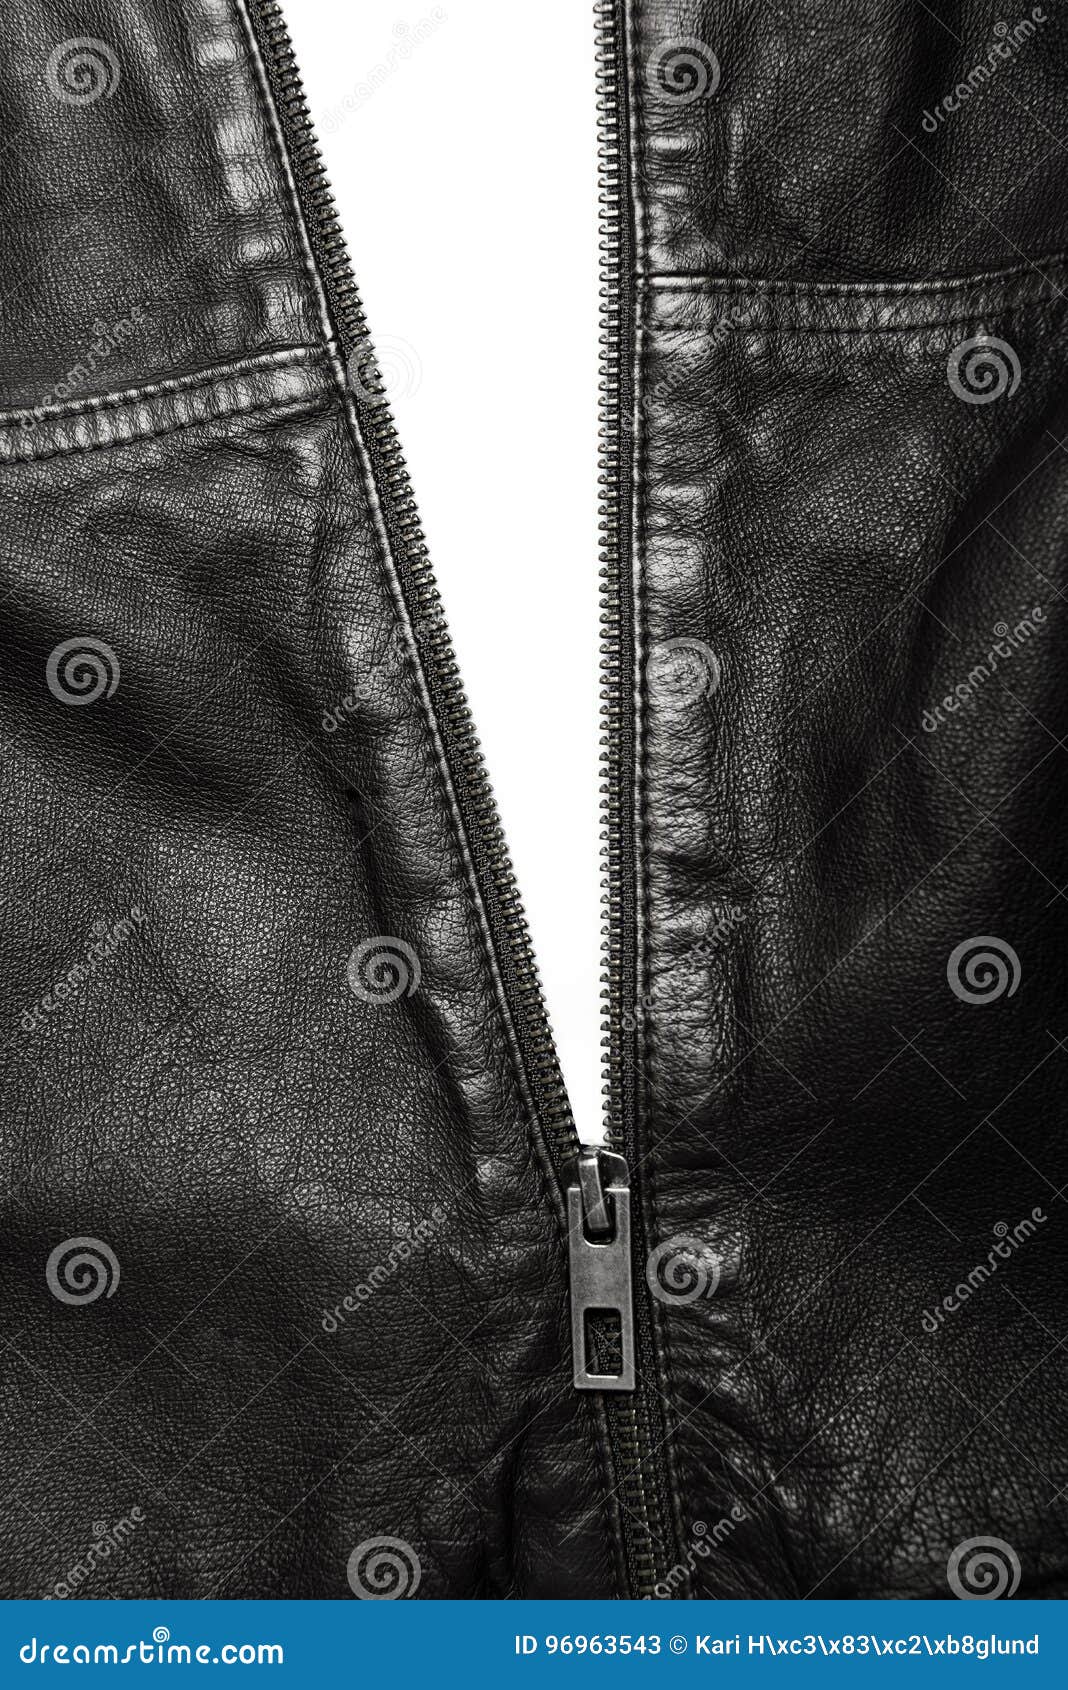 Black Leather Jacket with the Zip Partly Open Stock Image - Image of ...